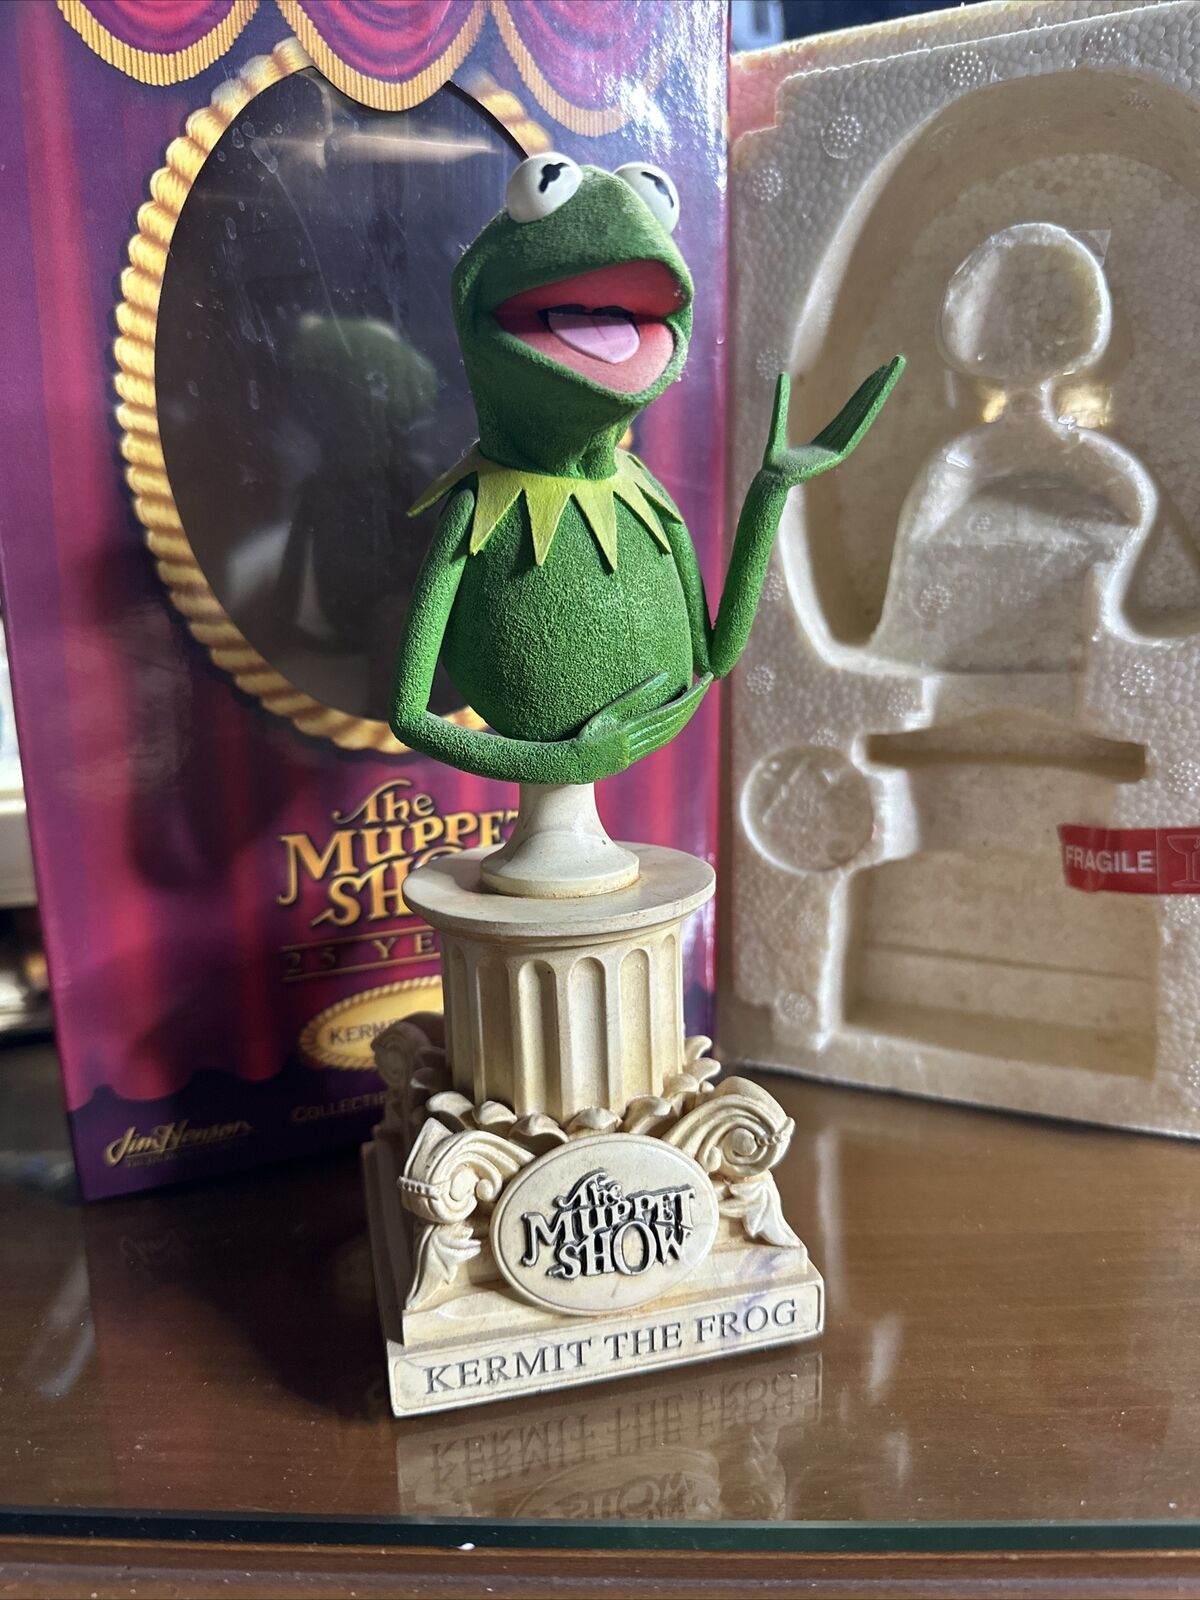 The Muppet Show Kermit The Frog Bust 2002 Sideshow Weta Limited Edition 43/5000